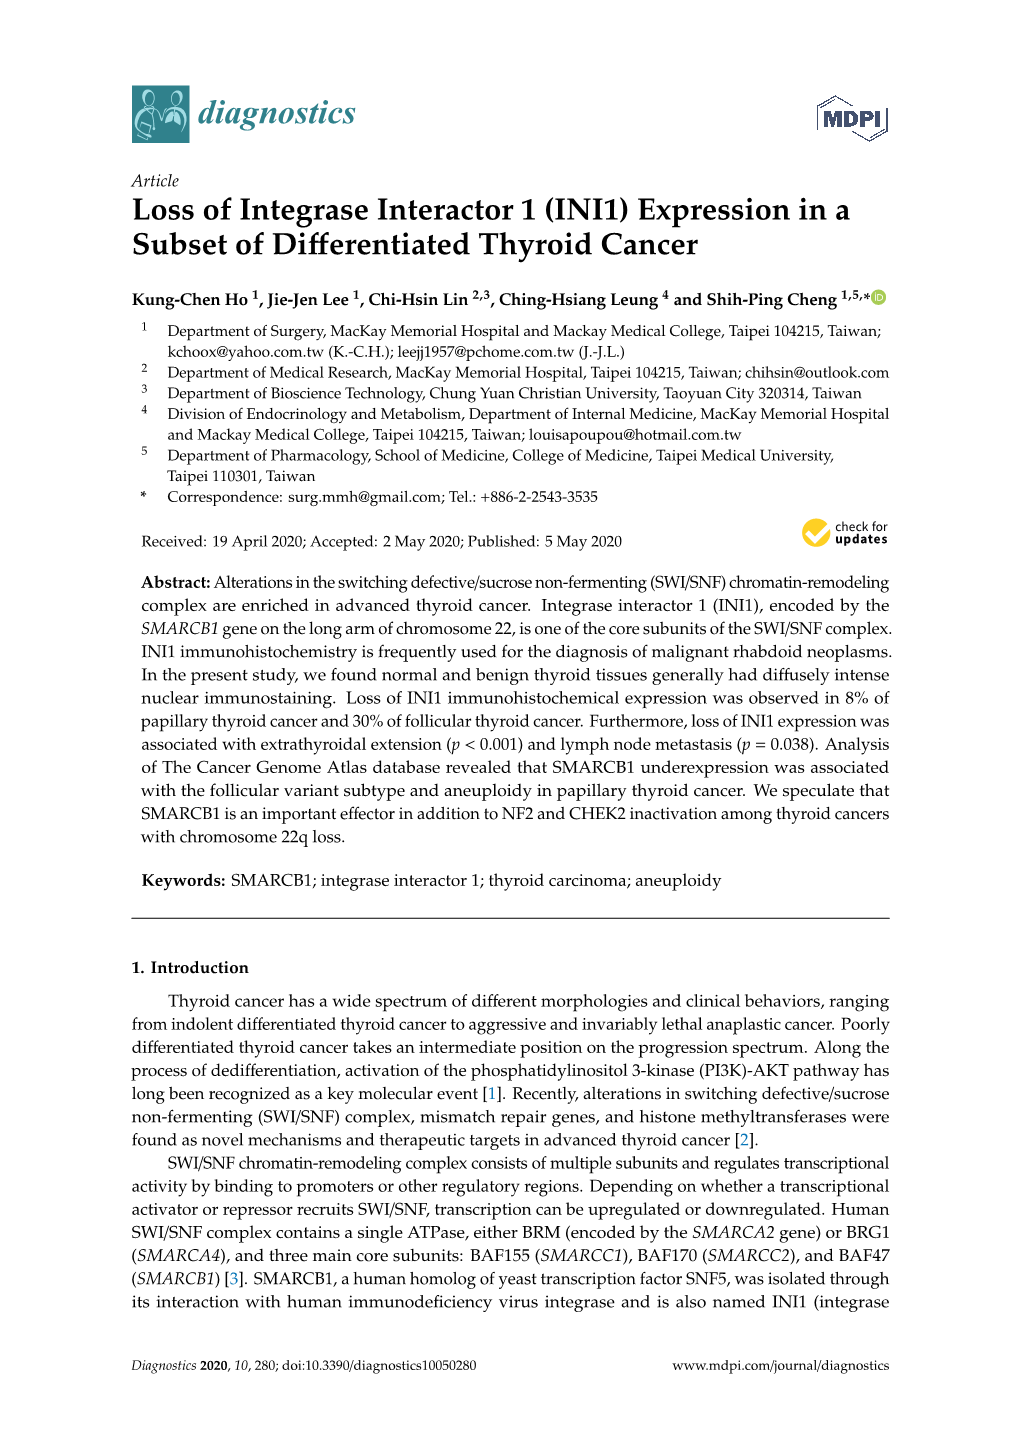 Loss of Integrase Interactor 1 (INI1) Expression in a Subset of Diﬀerentiated Thyroid Cancer